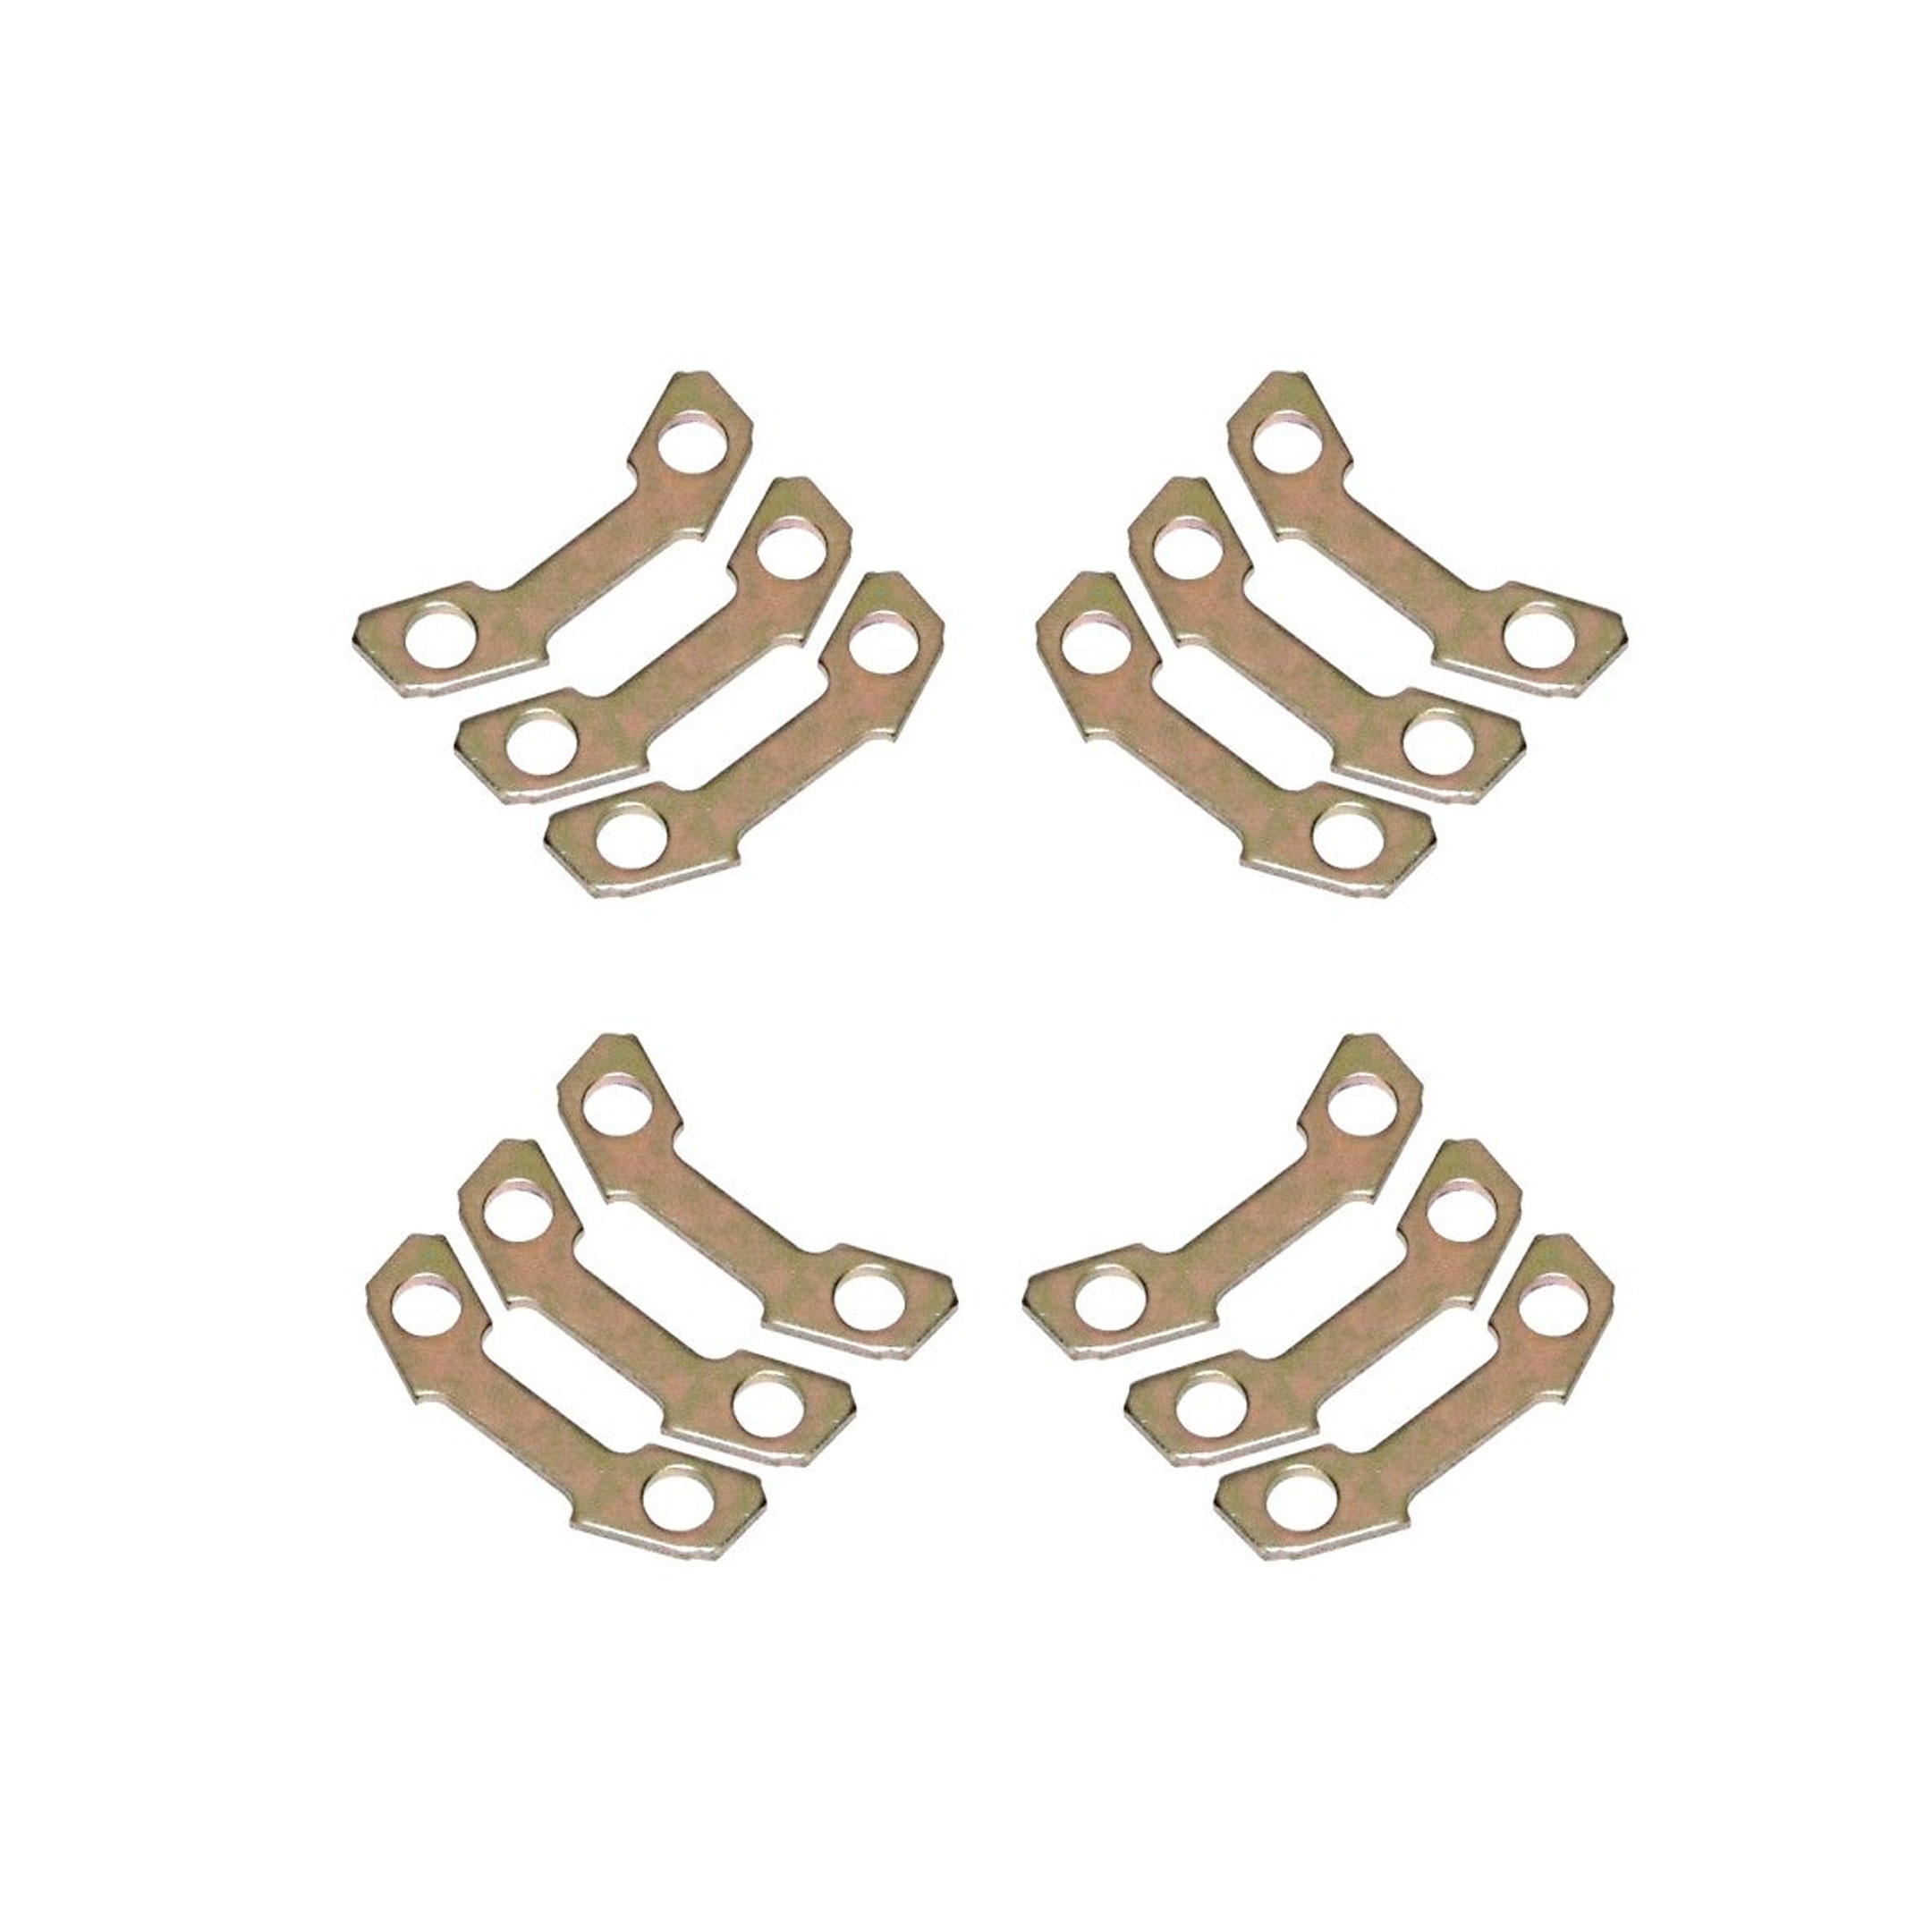 VW Type 2 CV Joint Torque Distribution Washers - Set of 12 Pieces